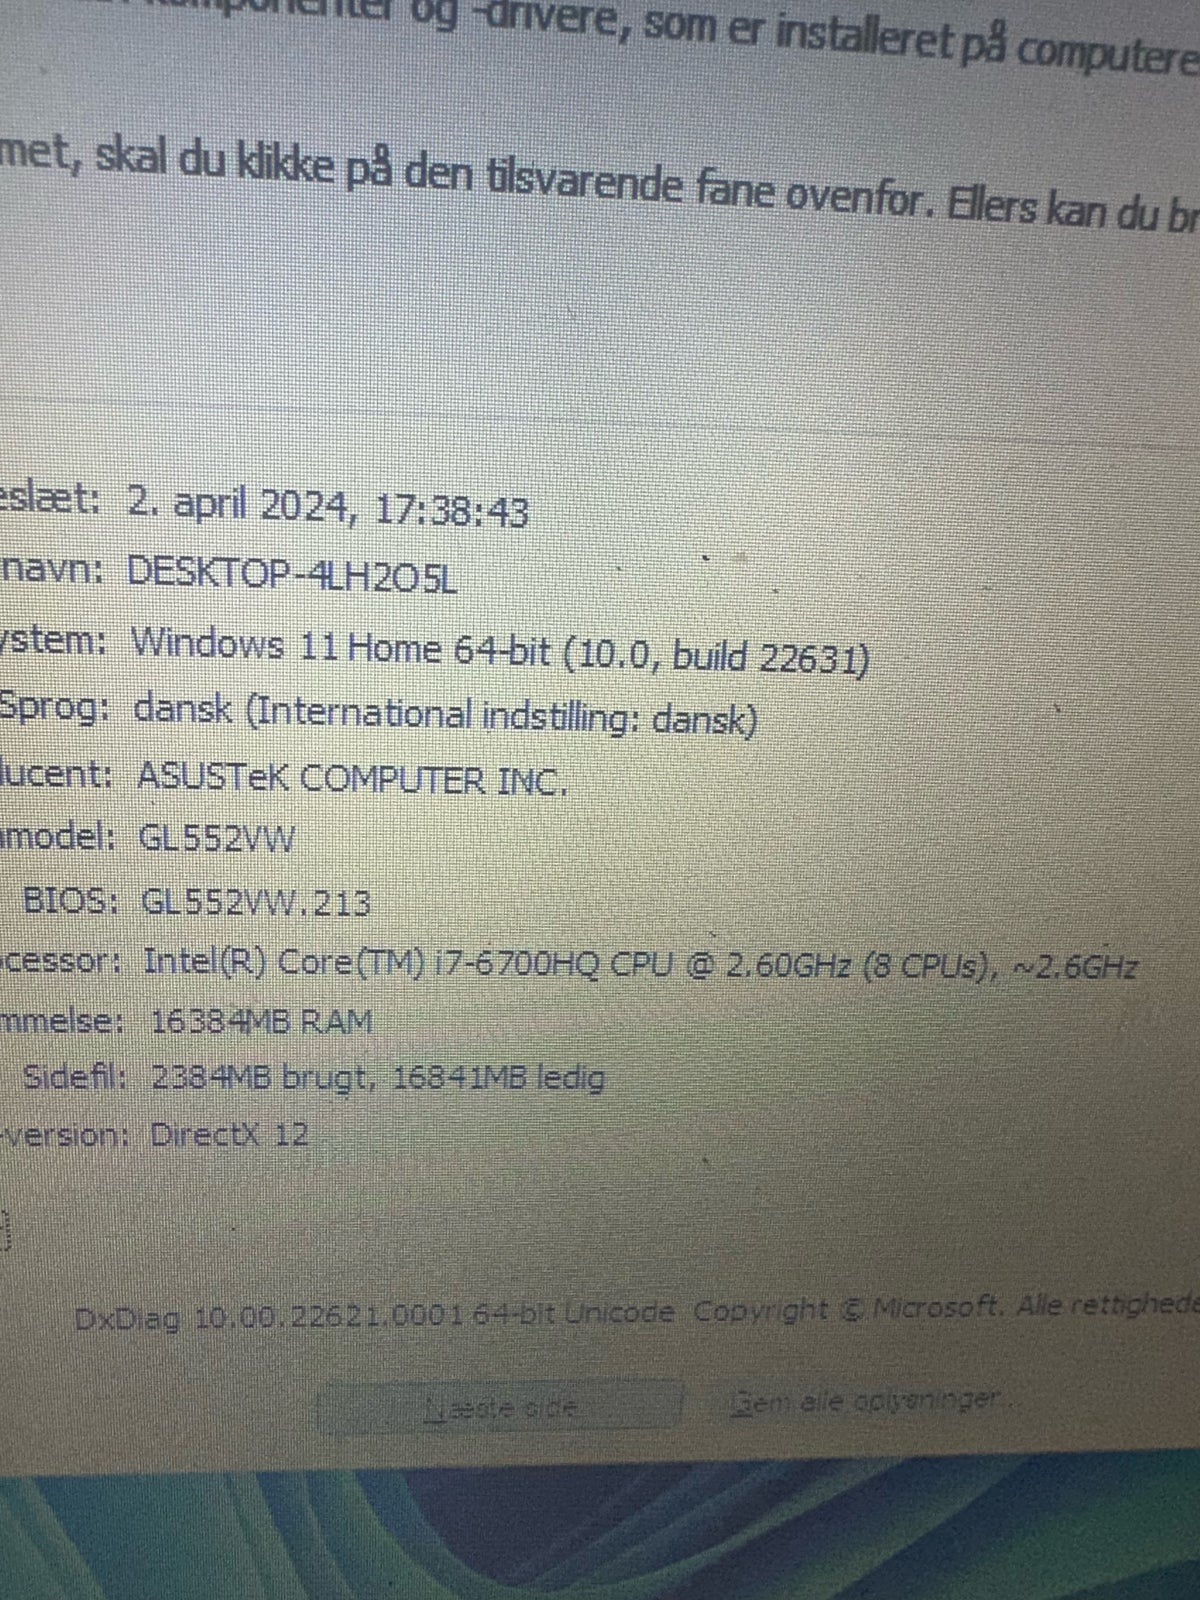 Asus Rog, Core i7 GHz, 16 GB ram